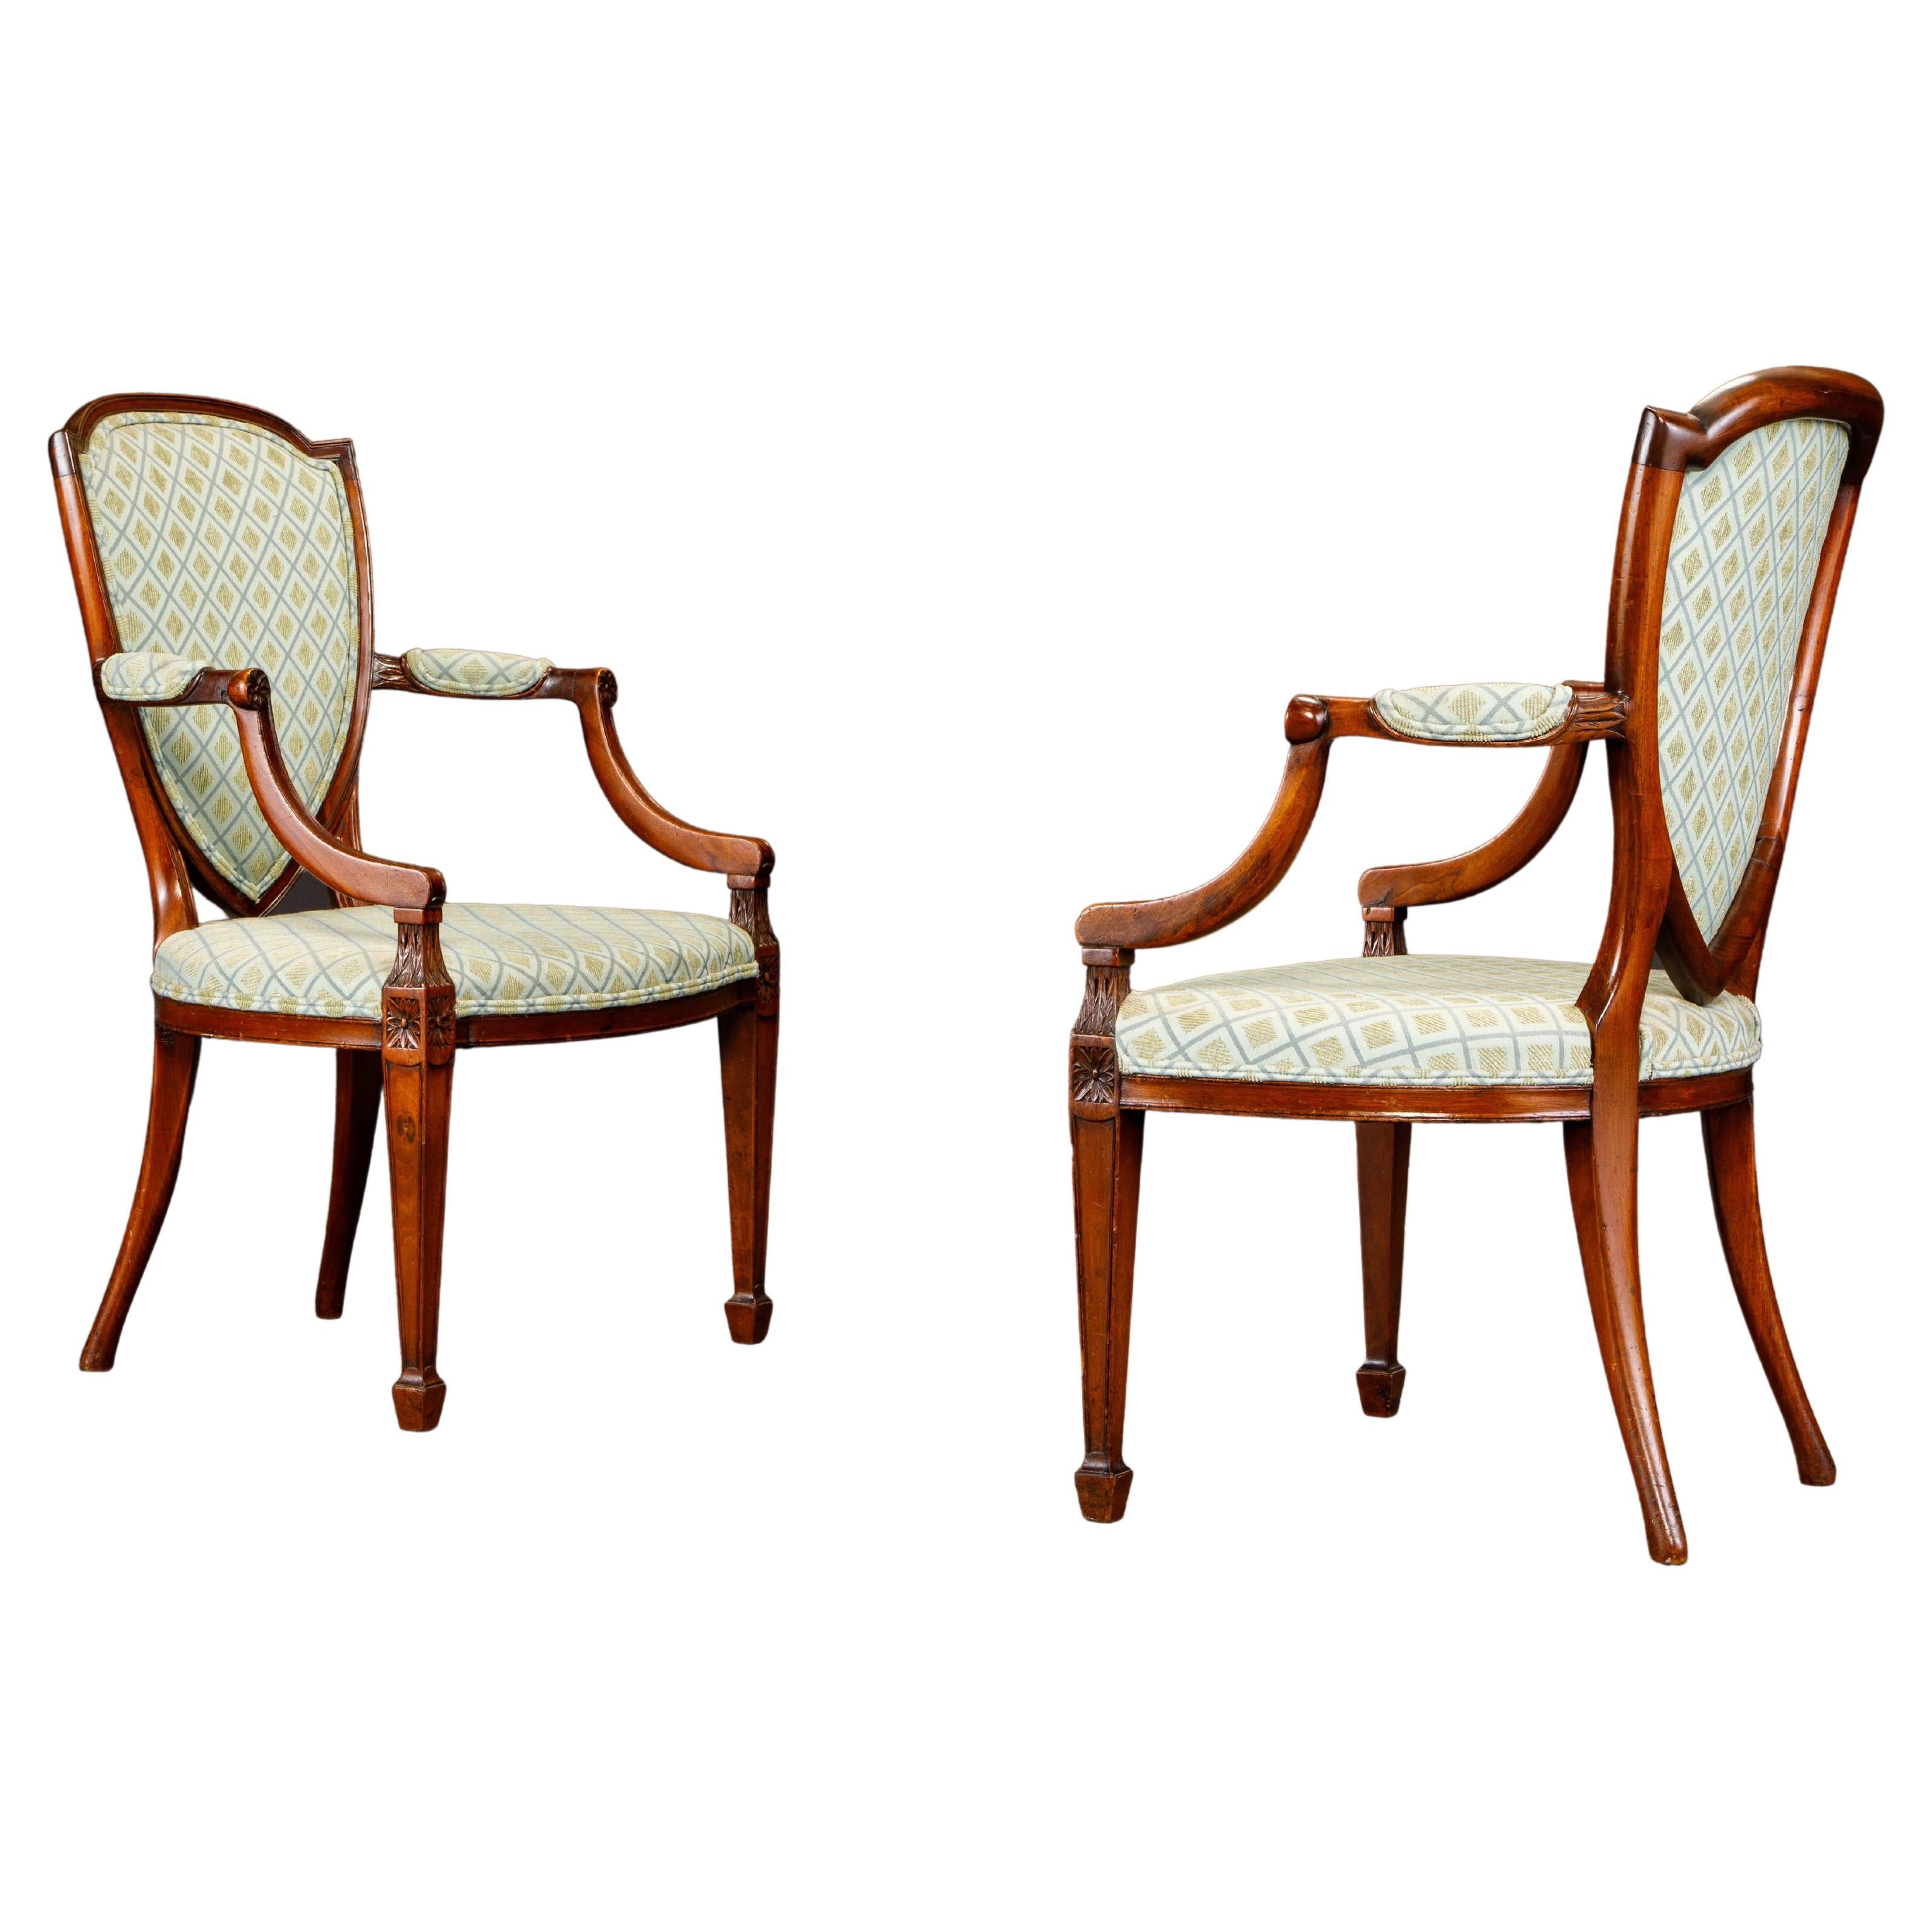 Pair of Upholstered Hepplewhite Shield-Back Armchairs w Provenance, circa 1870s For Sale